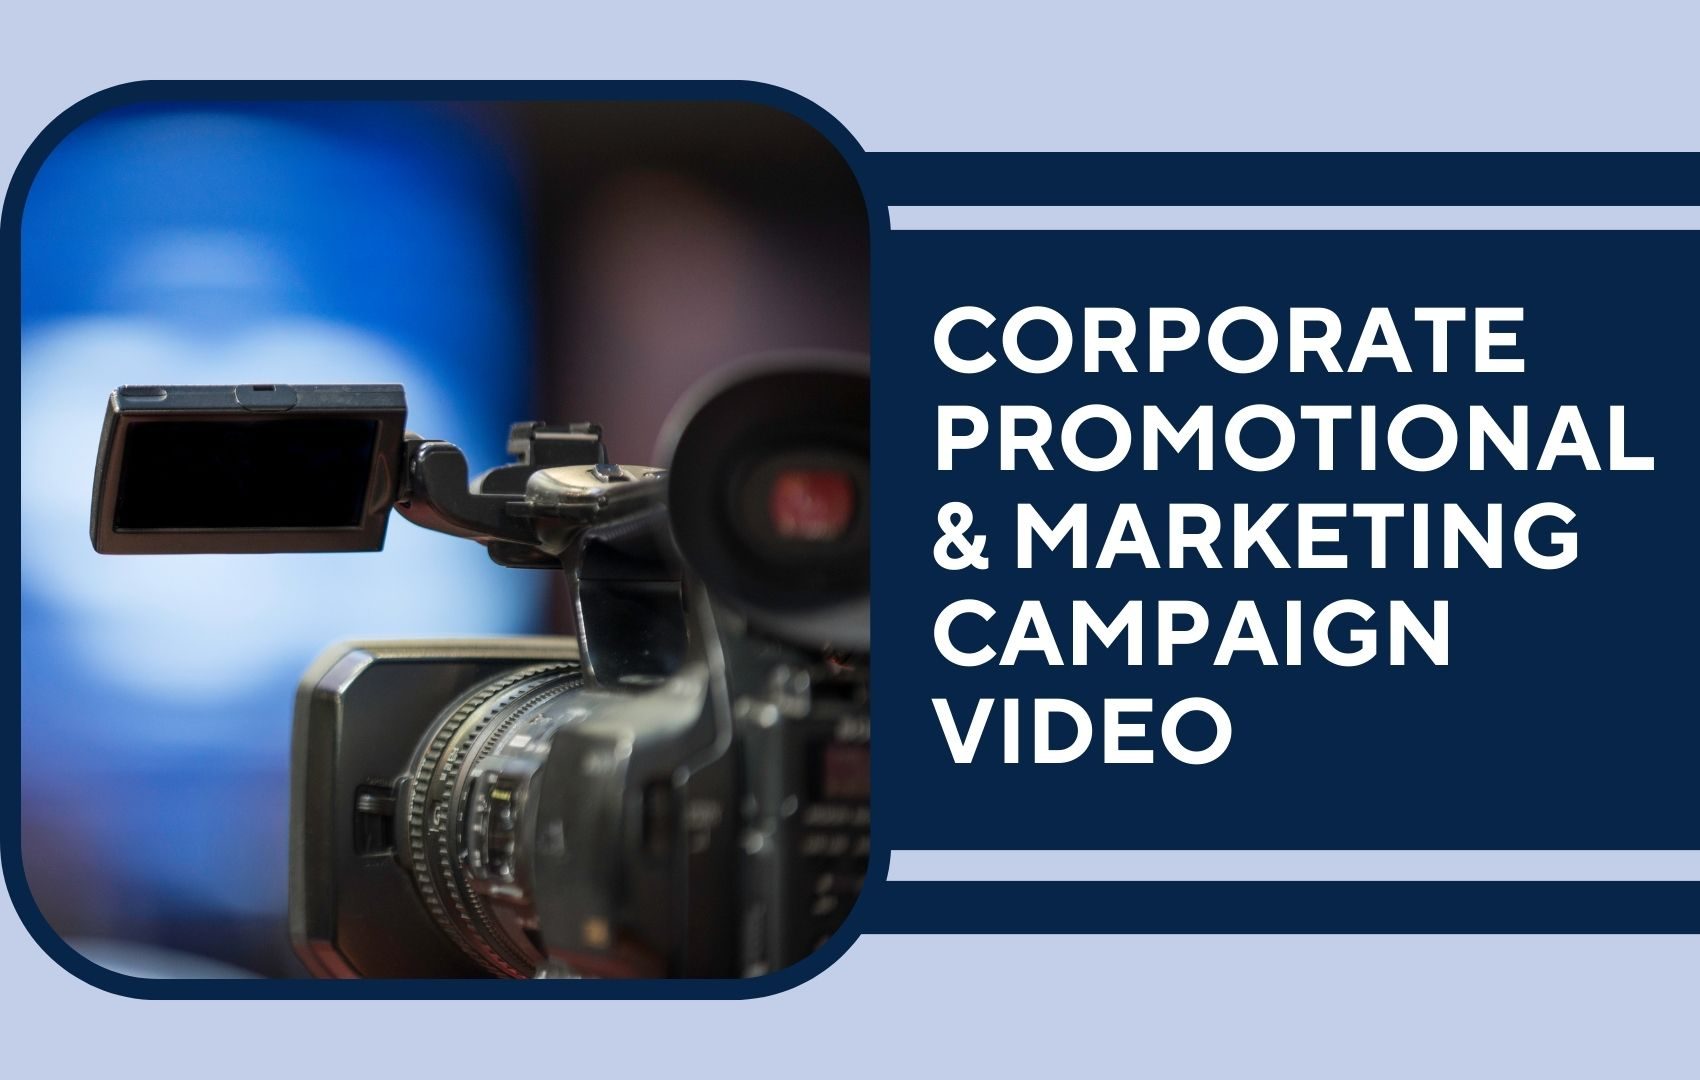 I Will Do Corporate Promotional & Marketing Campaign Video